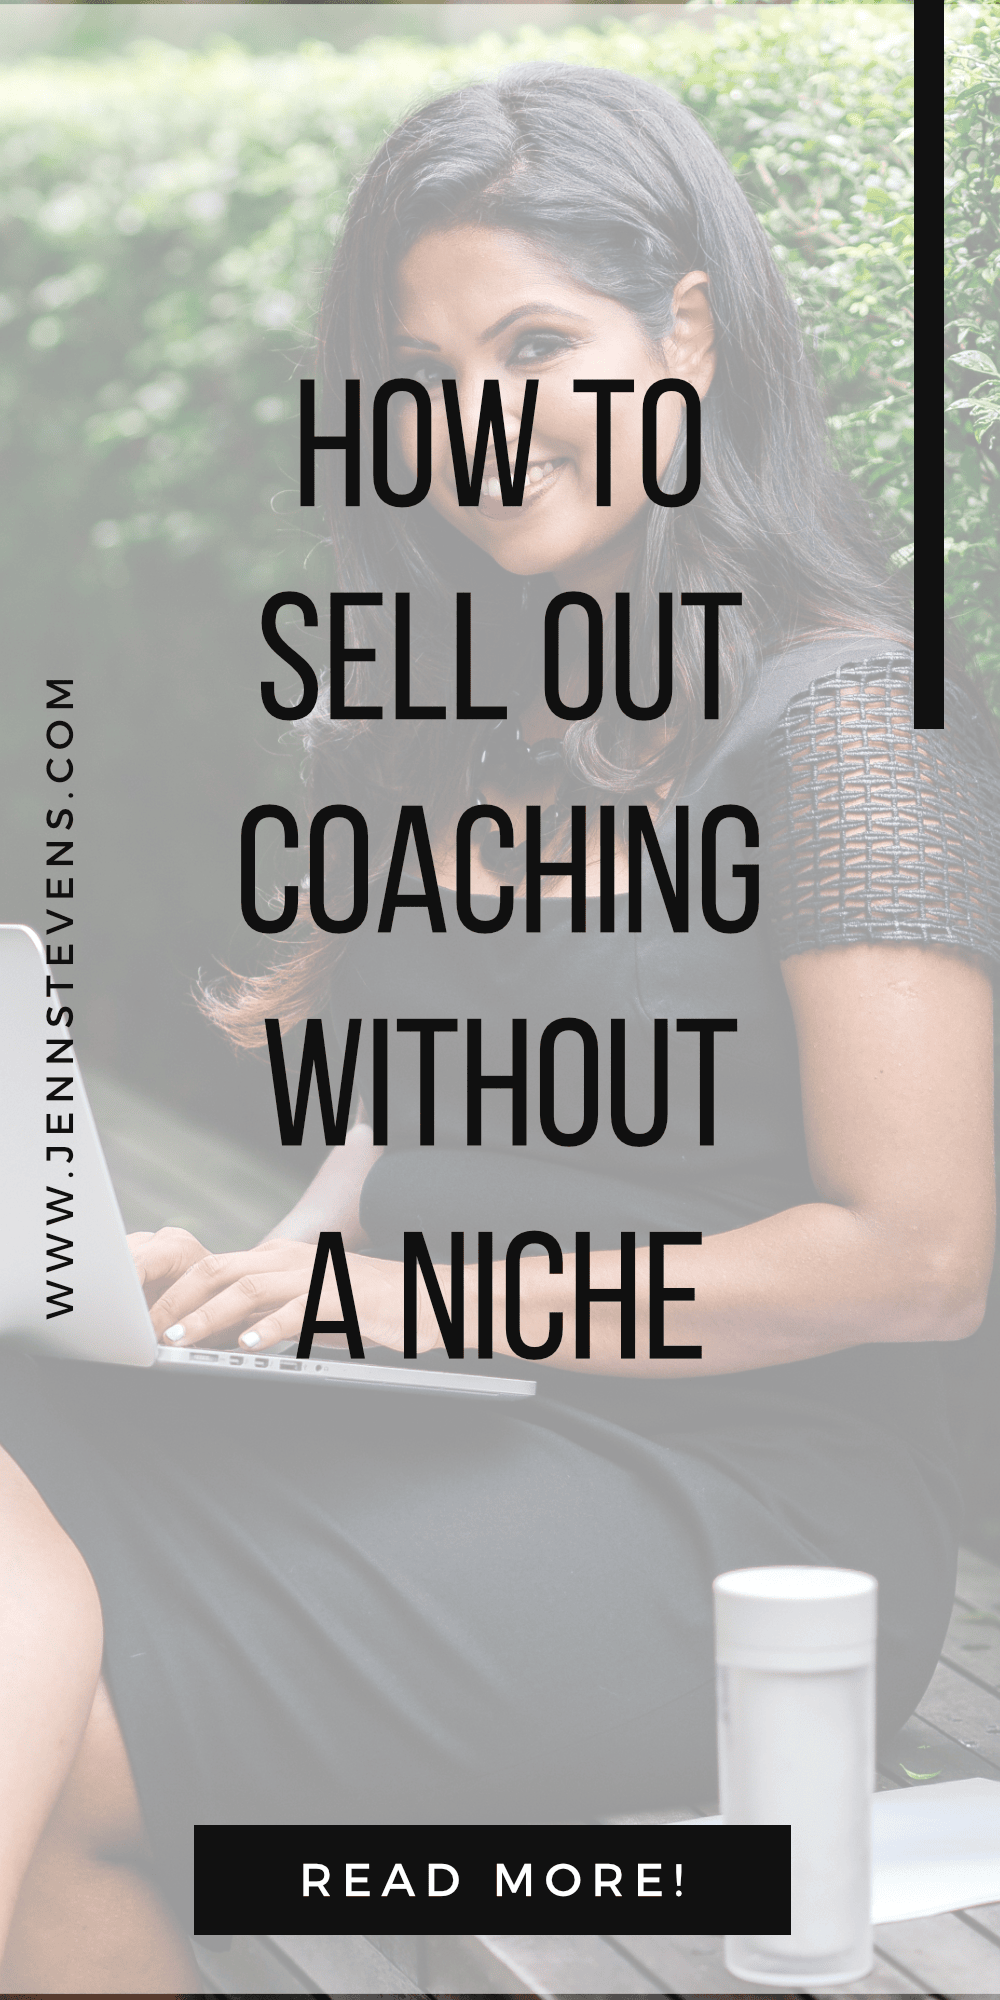 Sell Out Your Coaching or Services Without A Niche